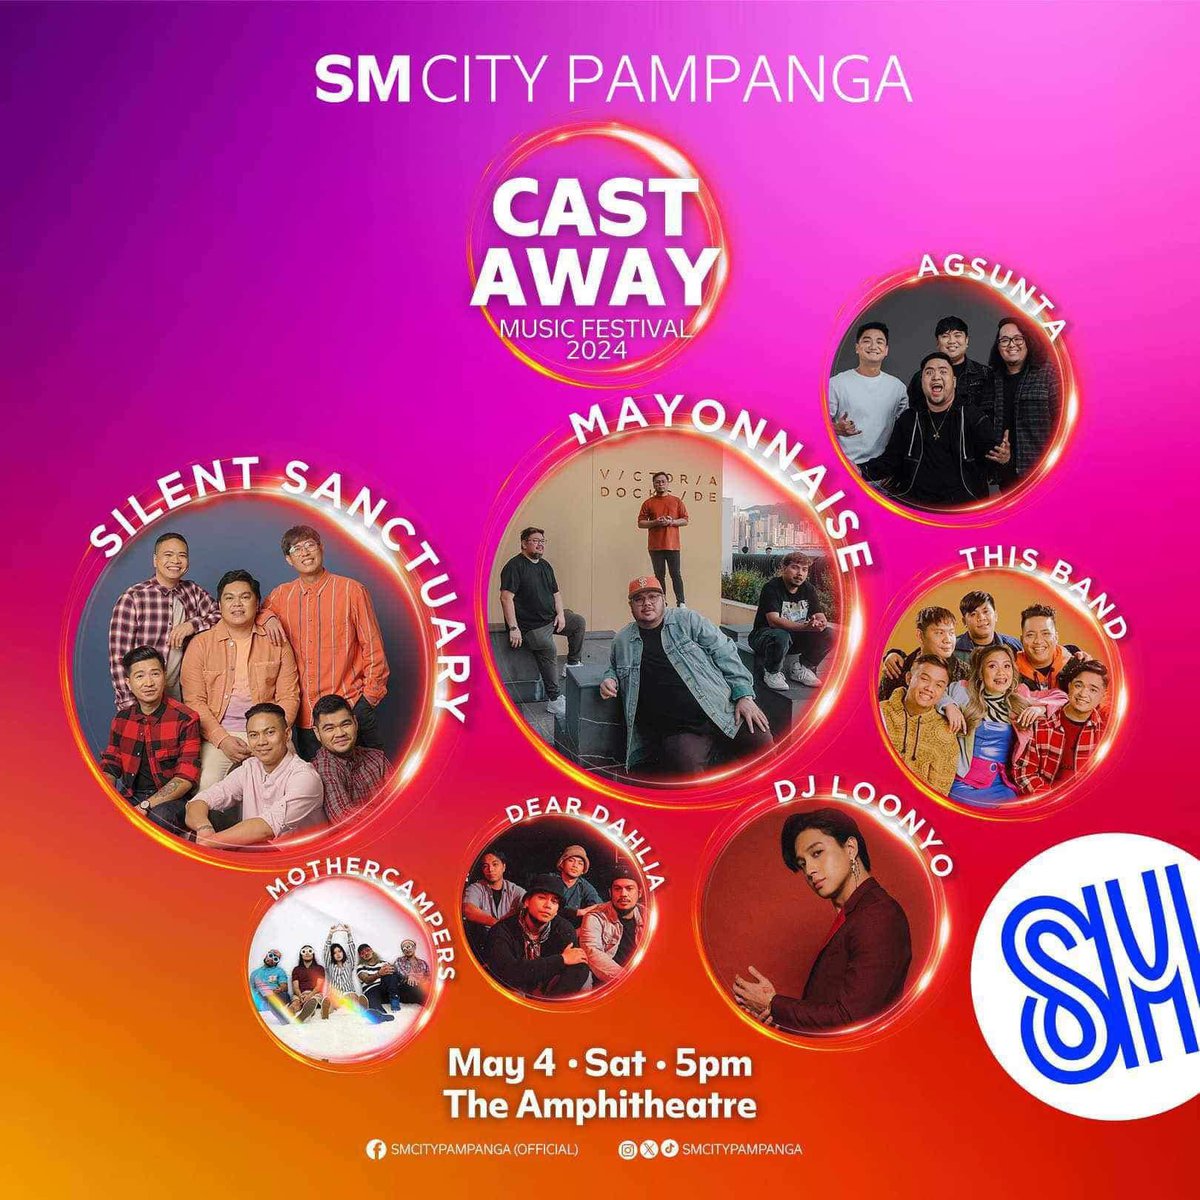 Get ready for the best concert party this summer, Castaways!

Check out these artists that will serenade you at the #CastawayMusicFestival2024 on May 4 at The Amphitheatre, SM City Pampanga!

See you!

#SummerHangOutAtSM
#EverythingsHereAtSM